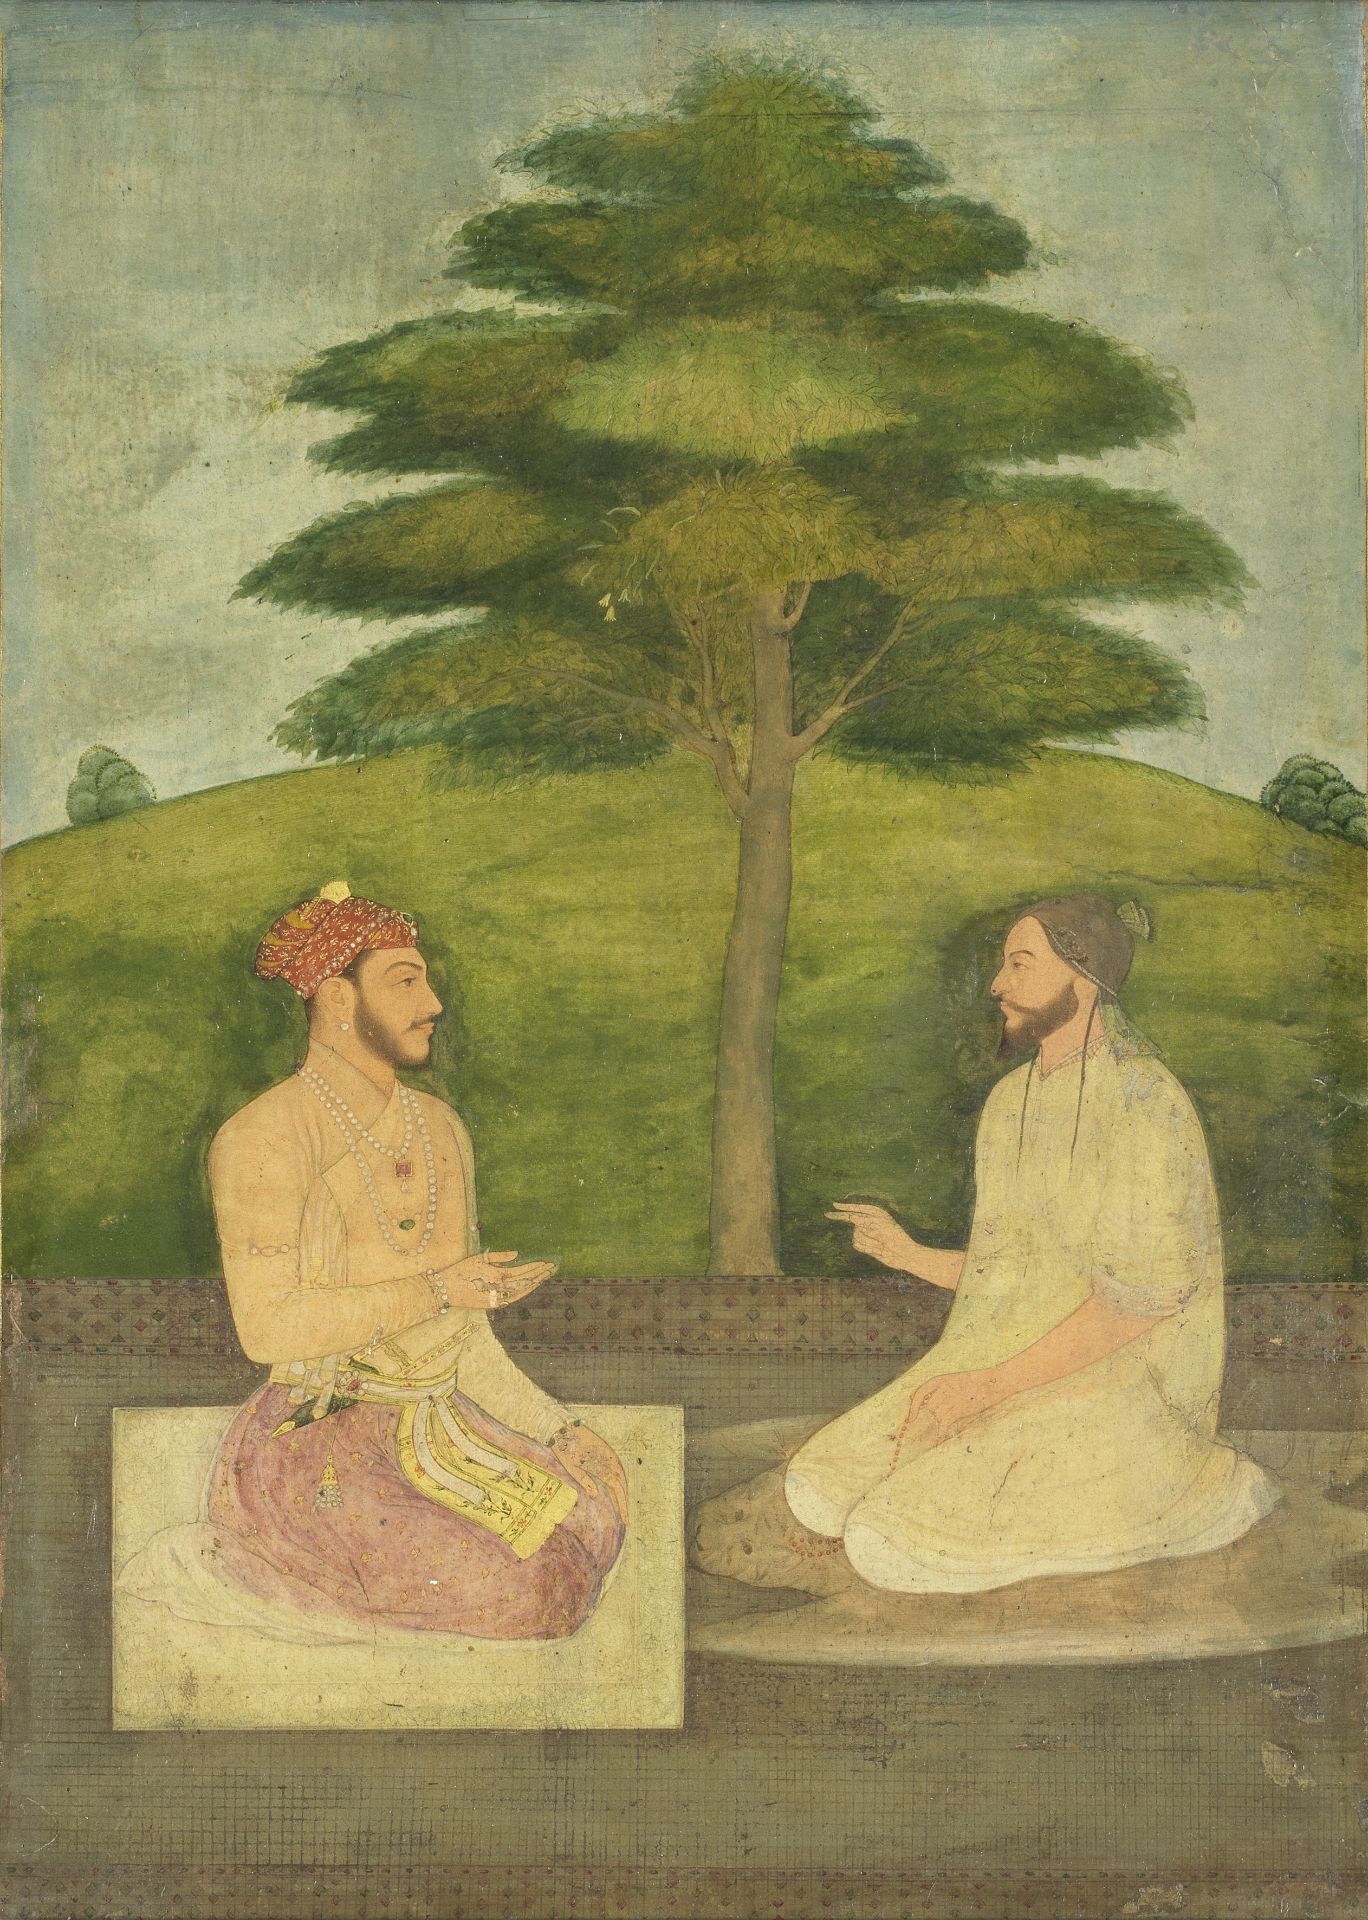 Prince Sulayman Shikuh in conversation with a scholar Mughal, attributed to Chitarman, circa 1655